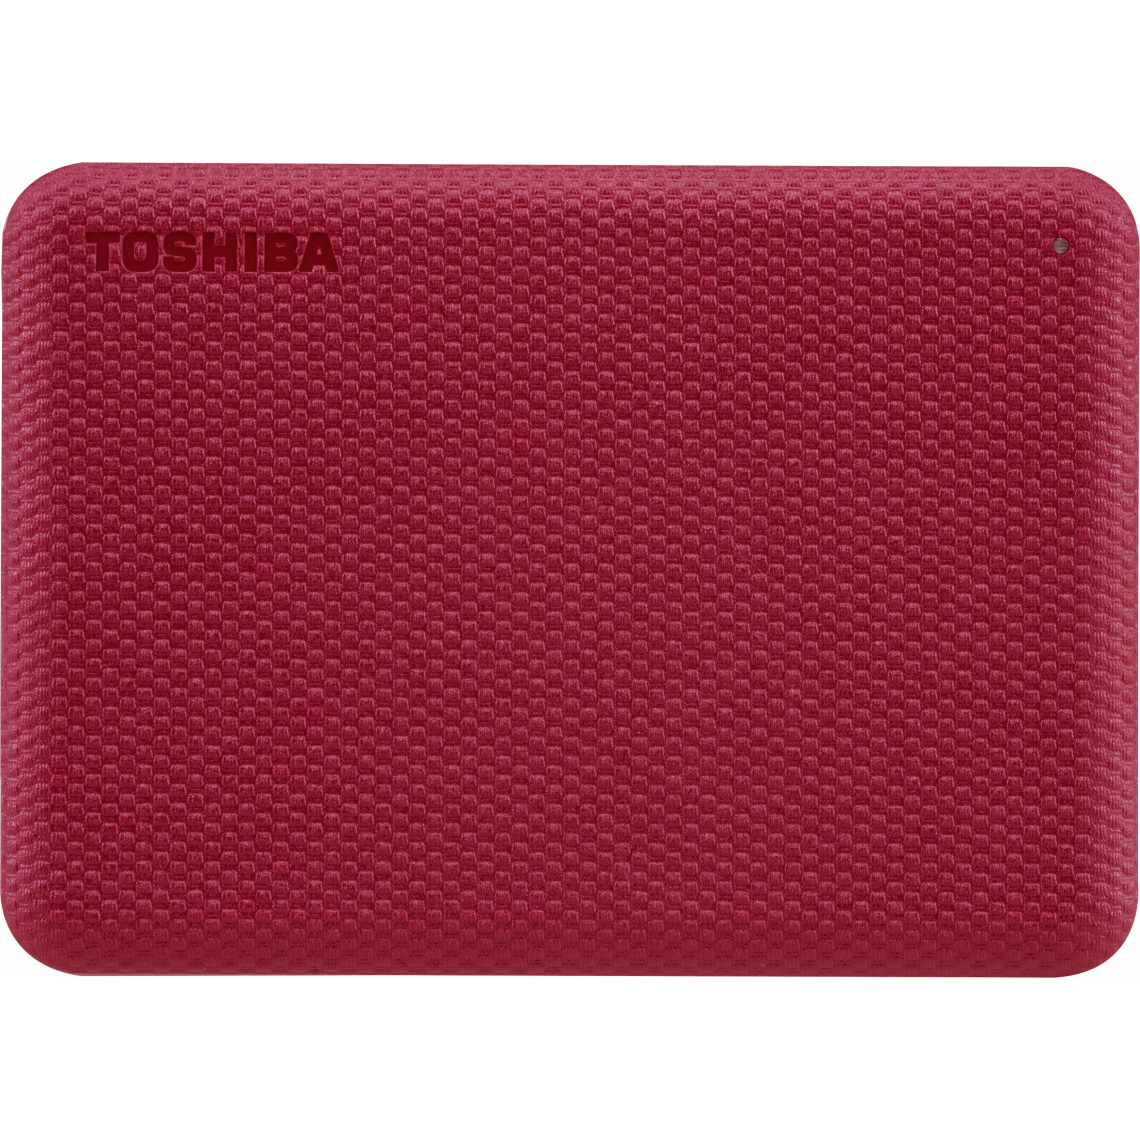 Toshiba - CANVIO ADVANCE 1 To rouge - Disque Dur externe